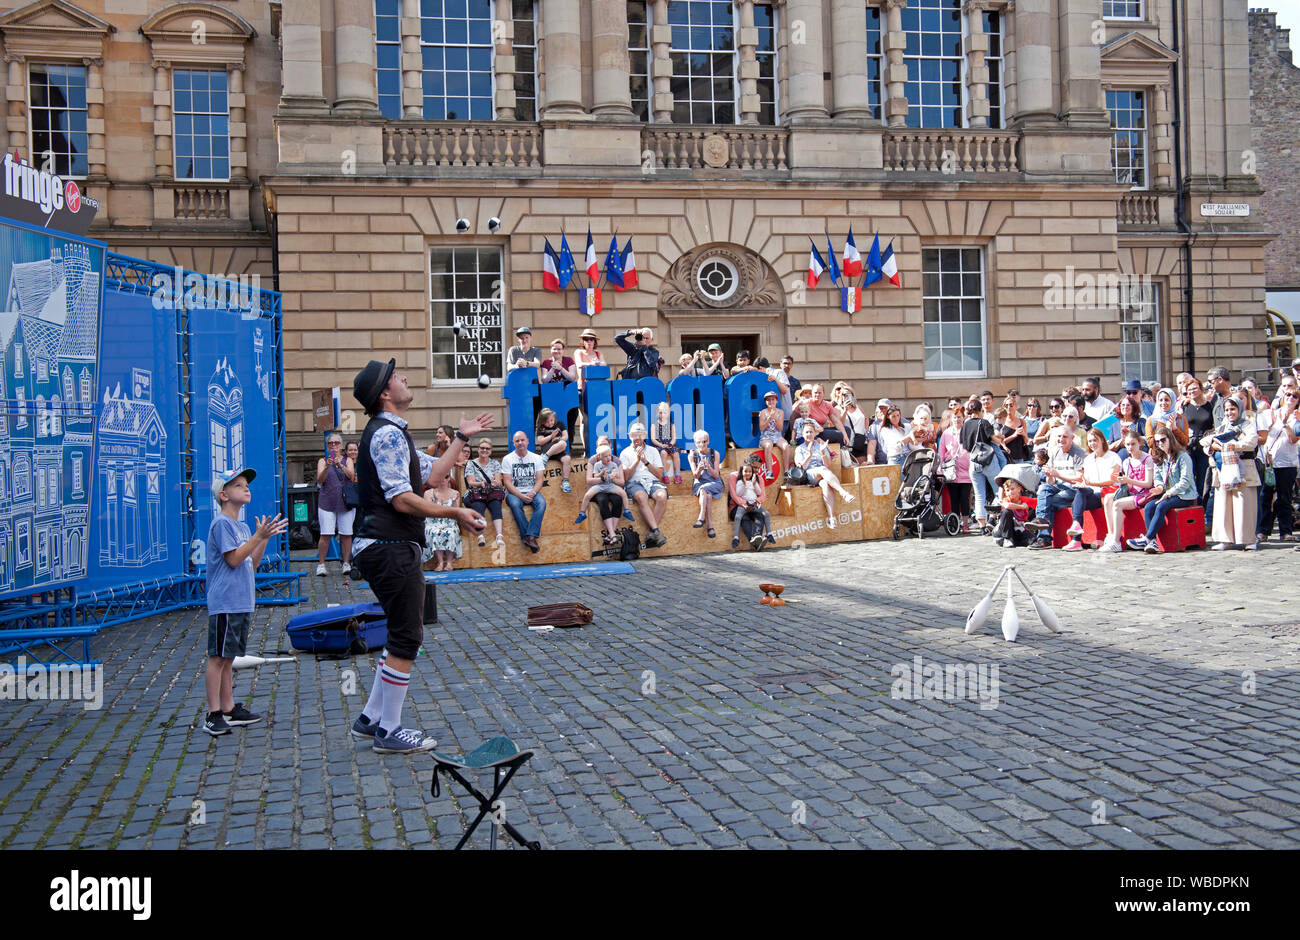 Edinburgh Fringe Festival, Scotland, UK. 26th Aug, 2019. Final day of the 2019 Edinburgh Fringe and the sun shone, with reported record breaking audiences and the most tickets sold ever. Corey Pickett entertains the audience in Parliament Square with his whacky interactive performance Stock Photo